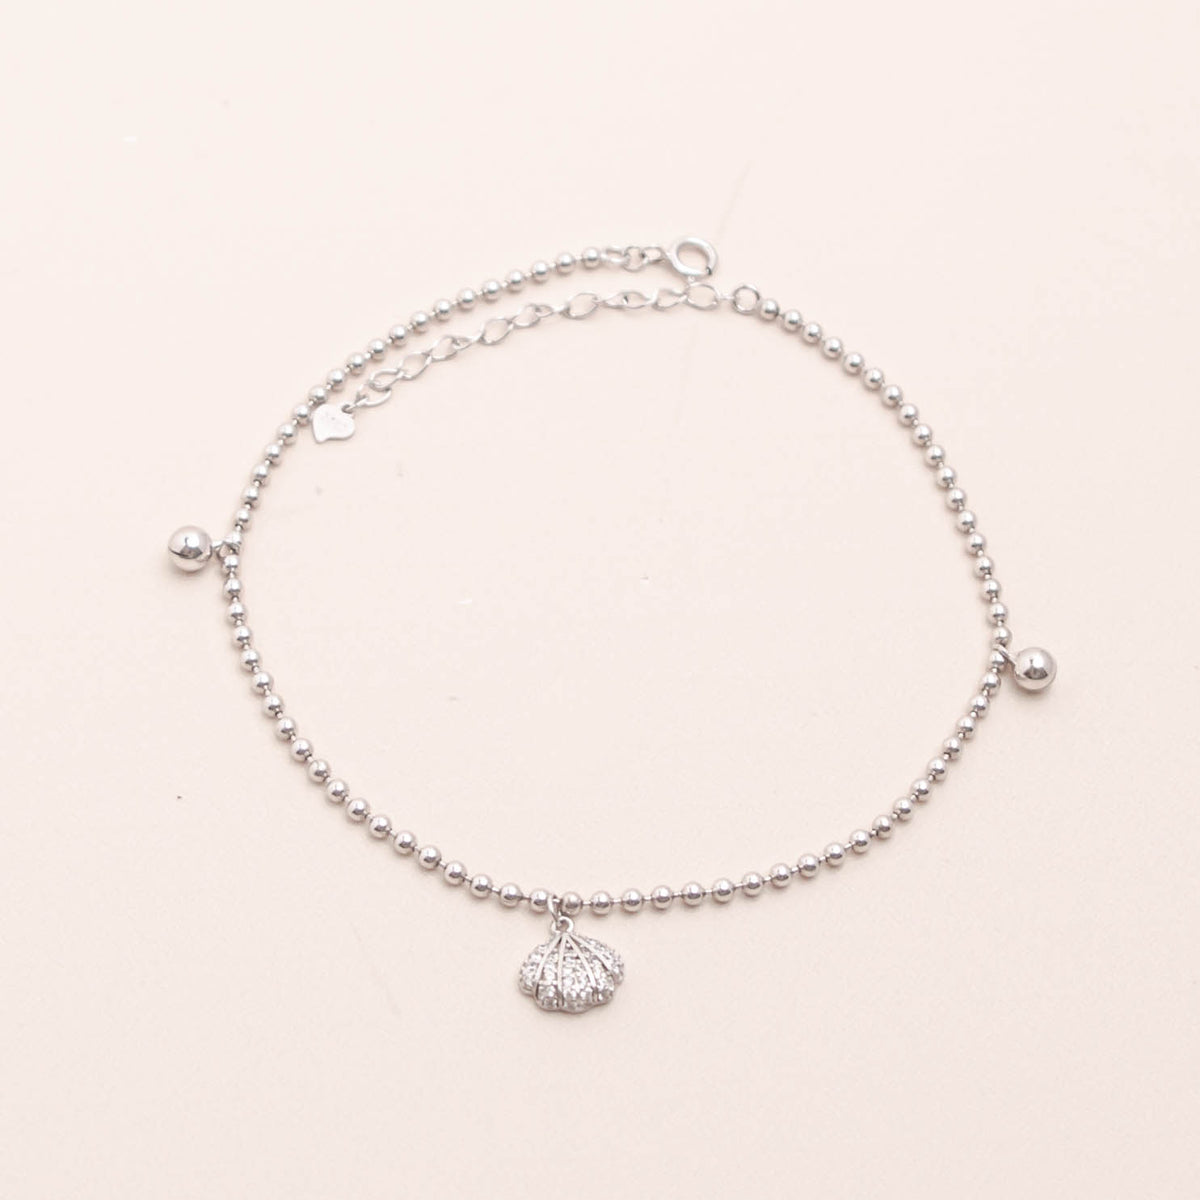 Sea-Shell Beads Anklet